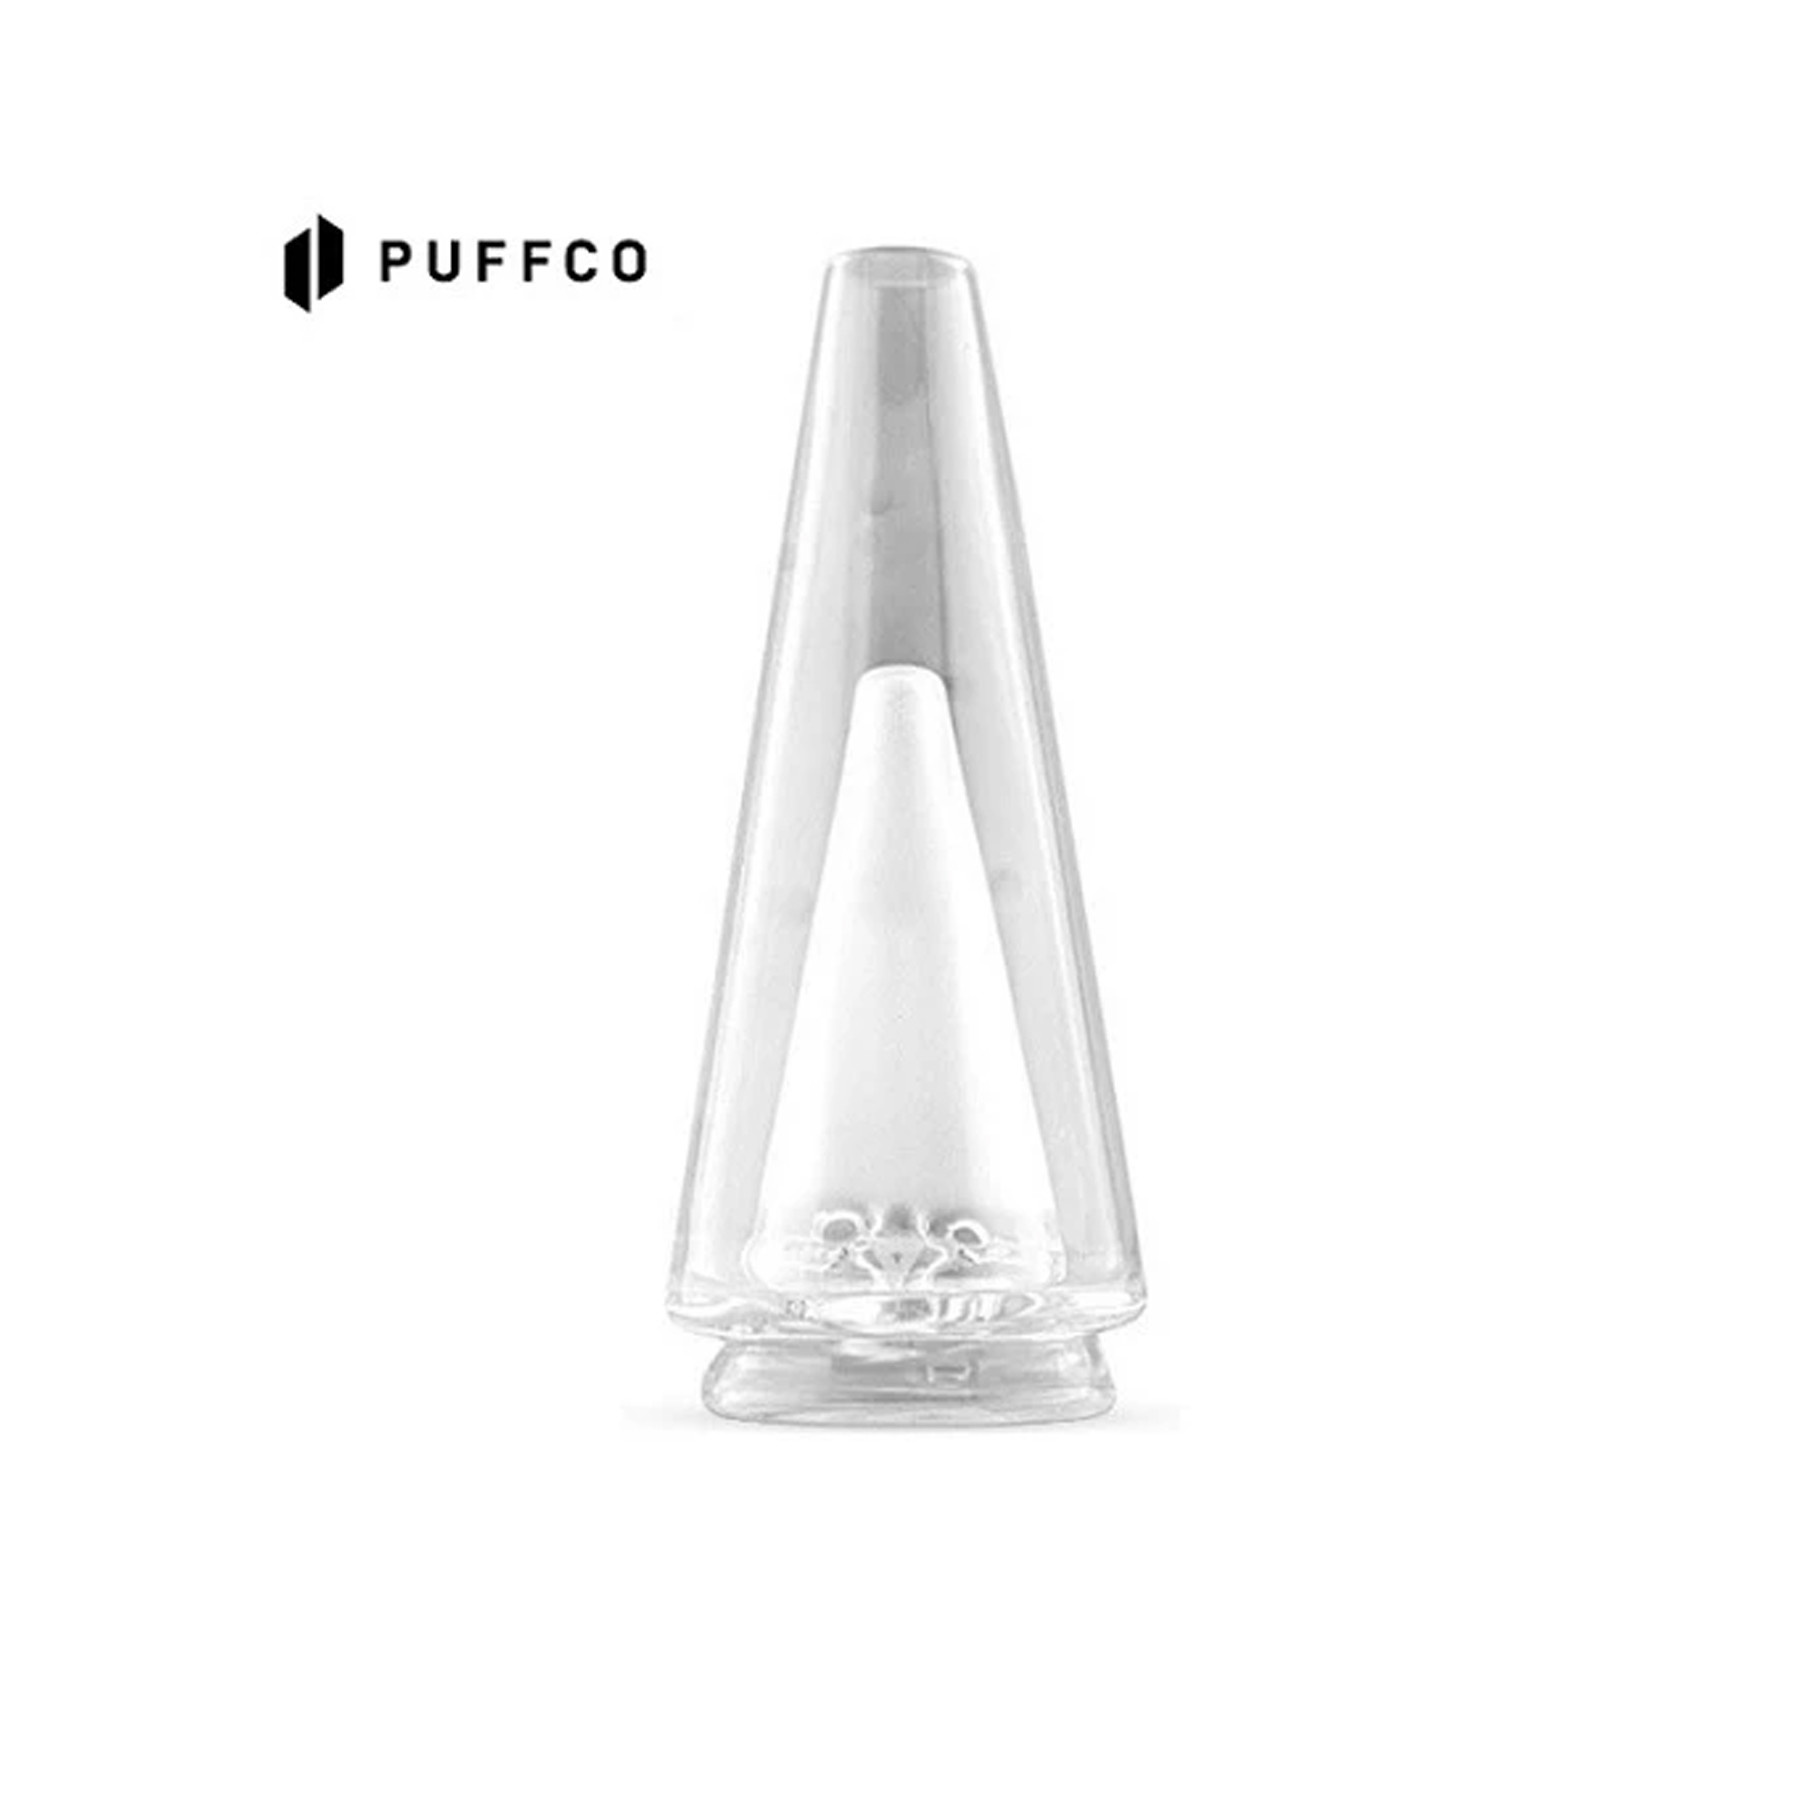 Replacement Glass - Puffco